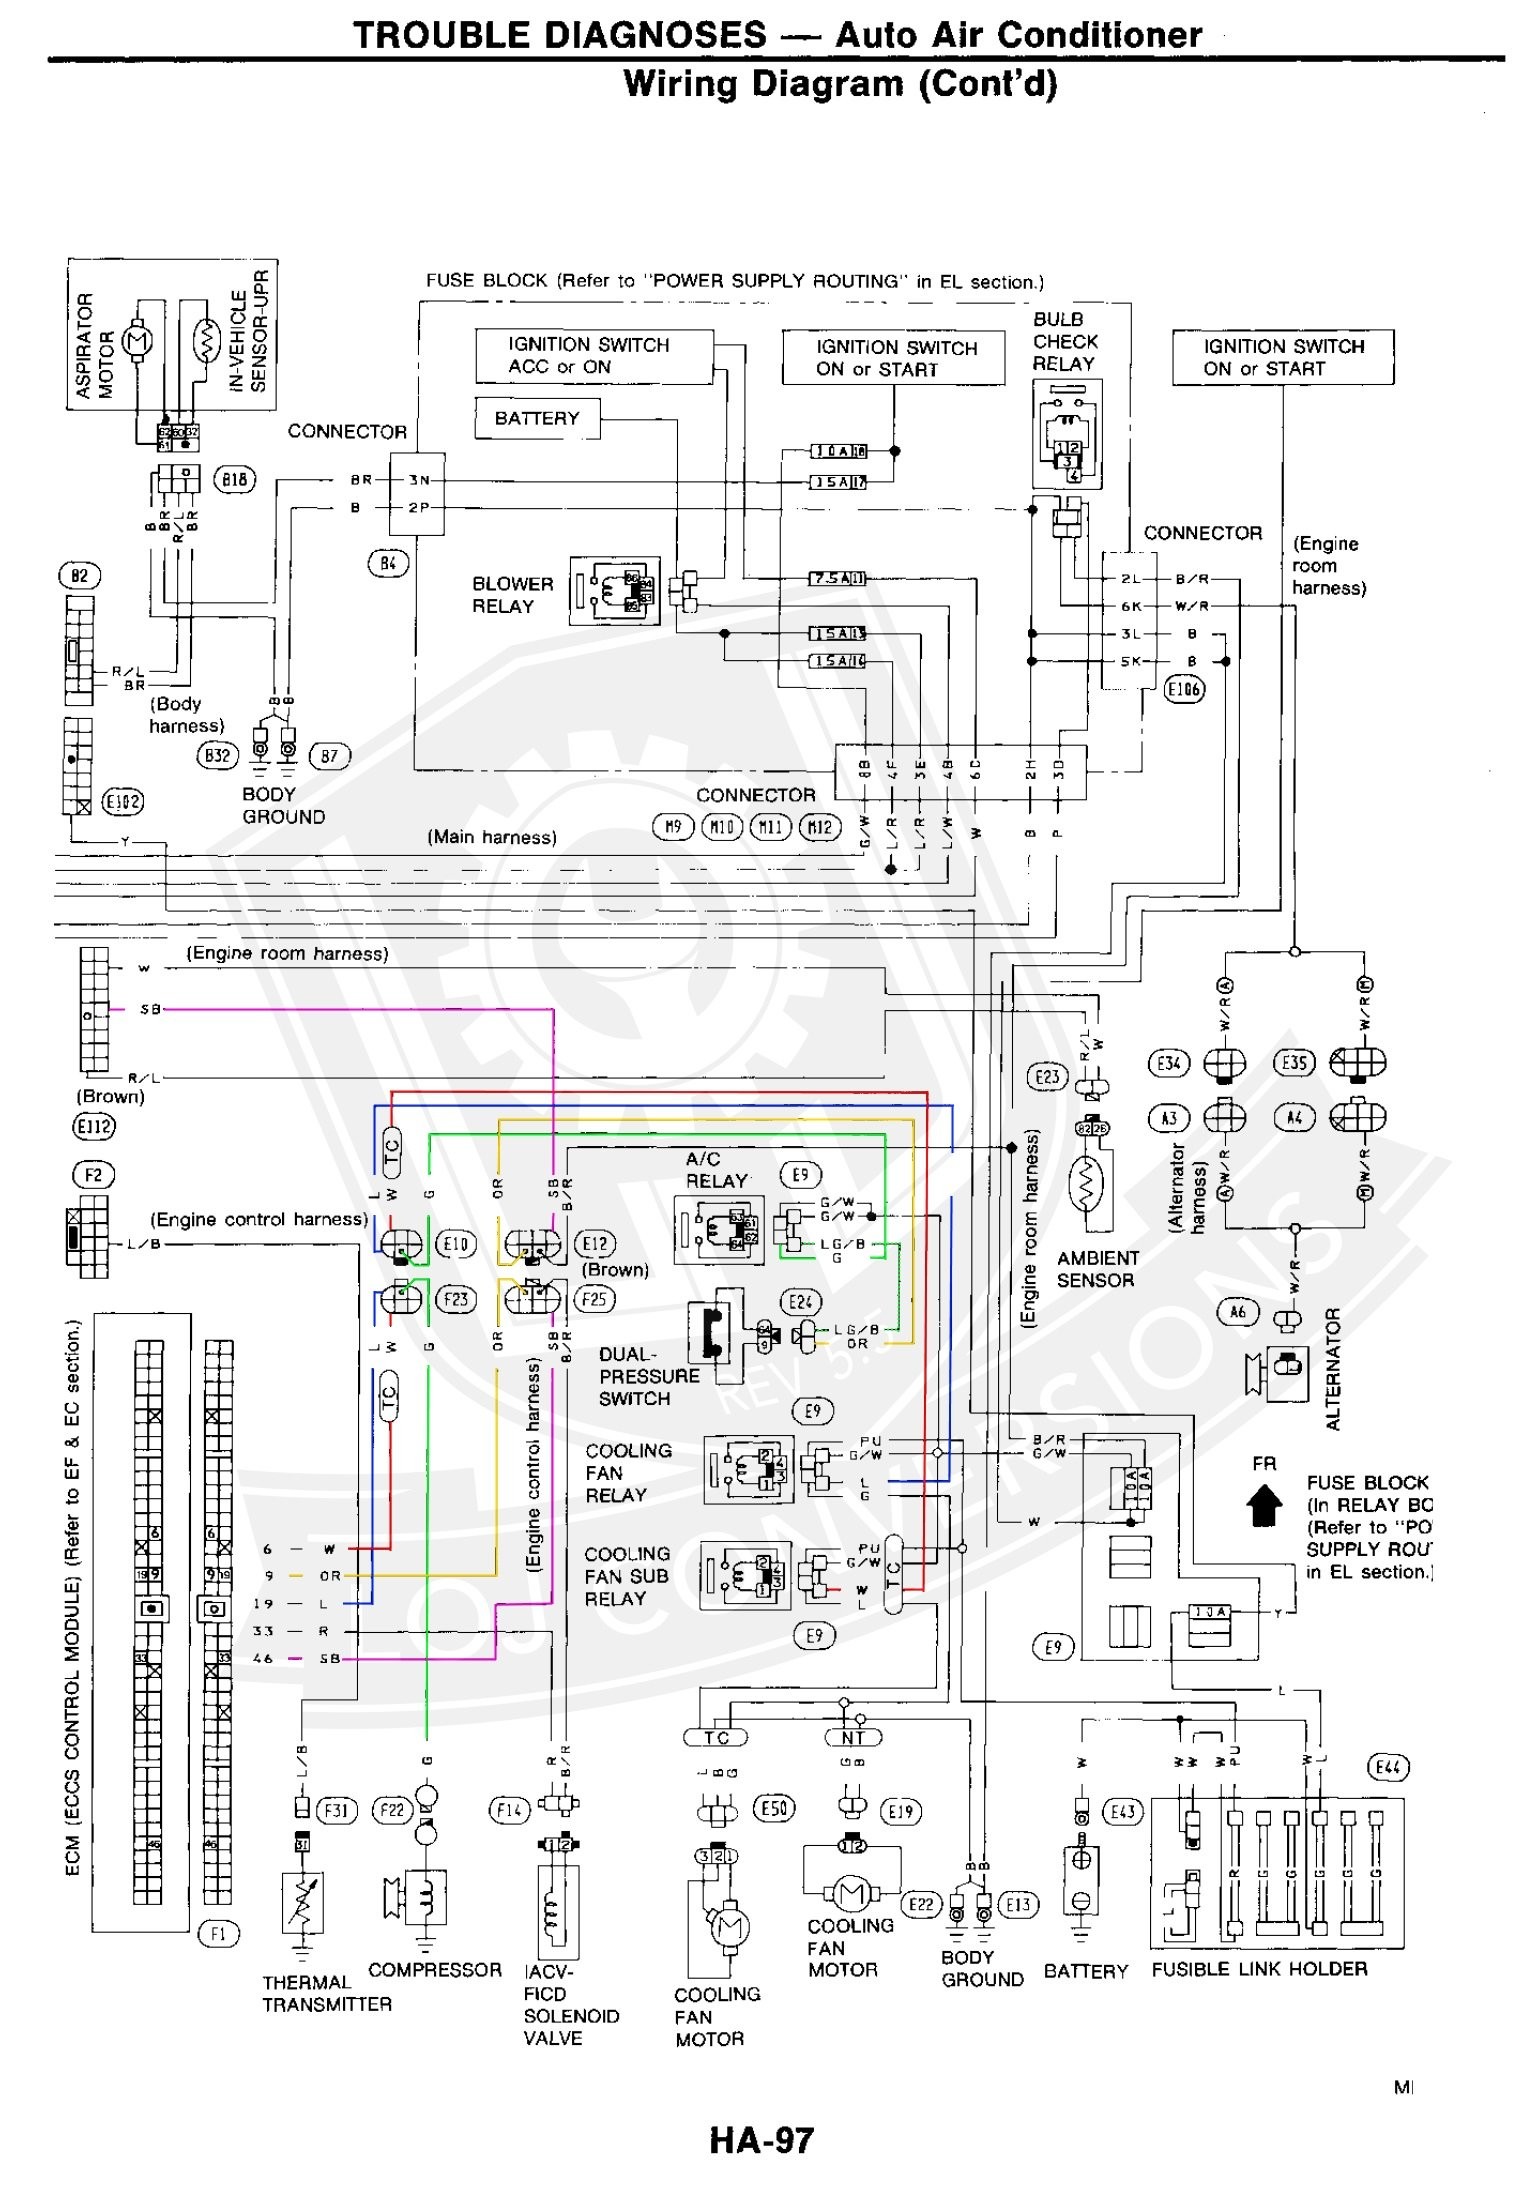 Time Bomb Circuit Diagram New 300zx Fuse Box Location